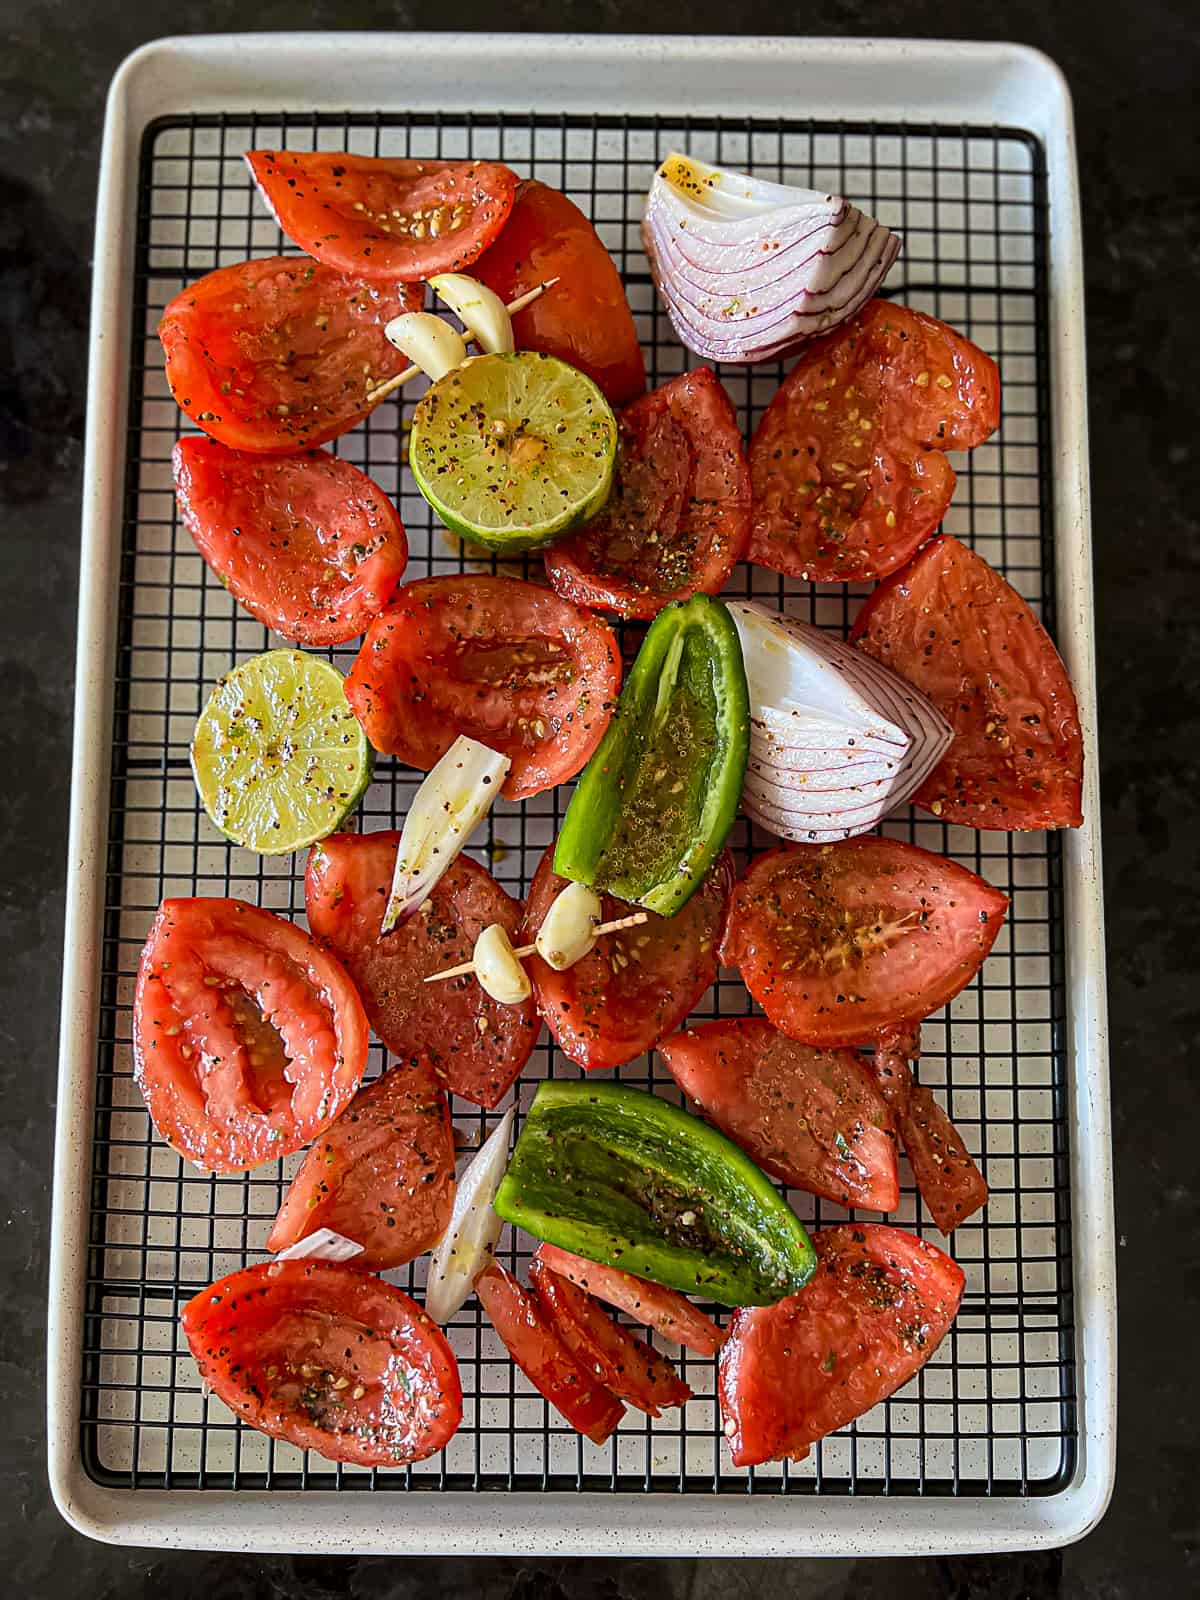 Fresh Vegetable Ingredients For Smoking Salsa On The Traeger Pellet Grill